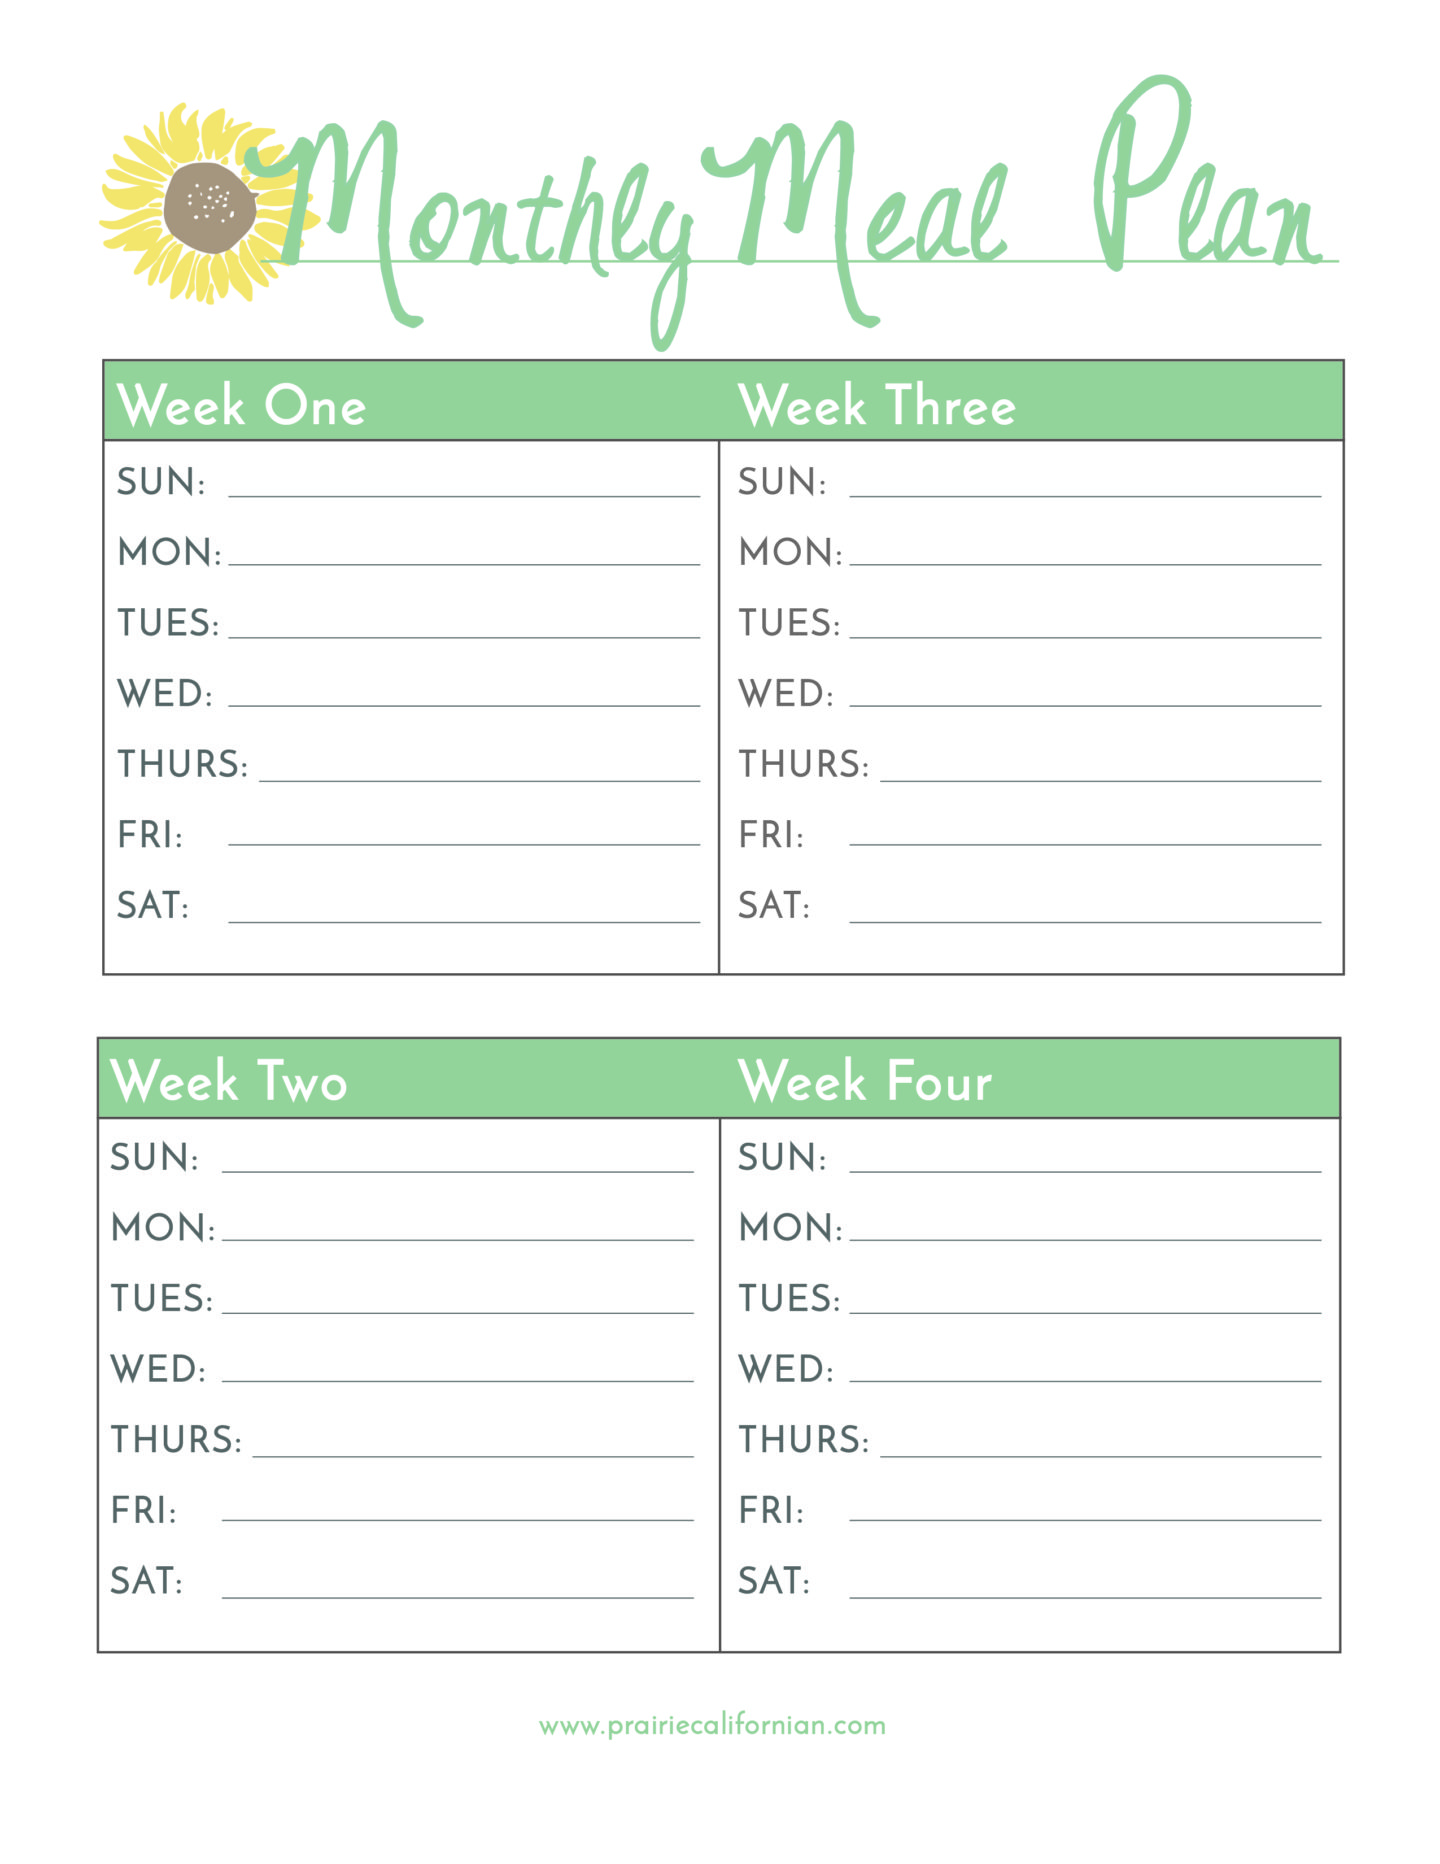 Month Meal Plan Template